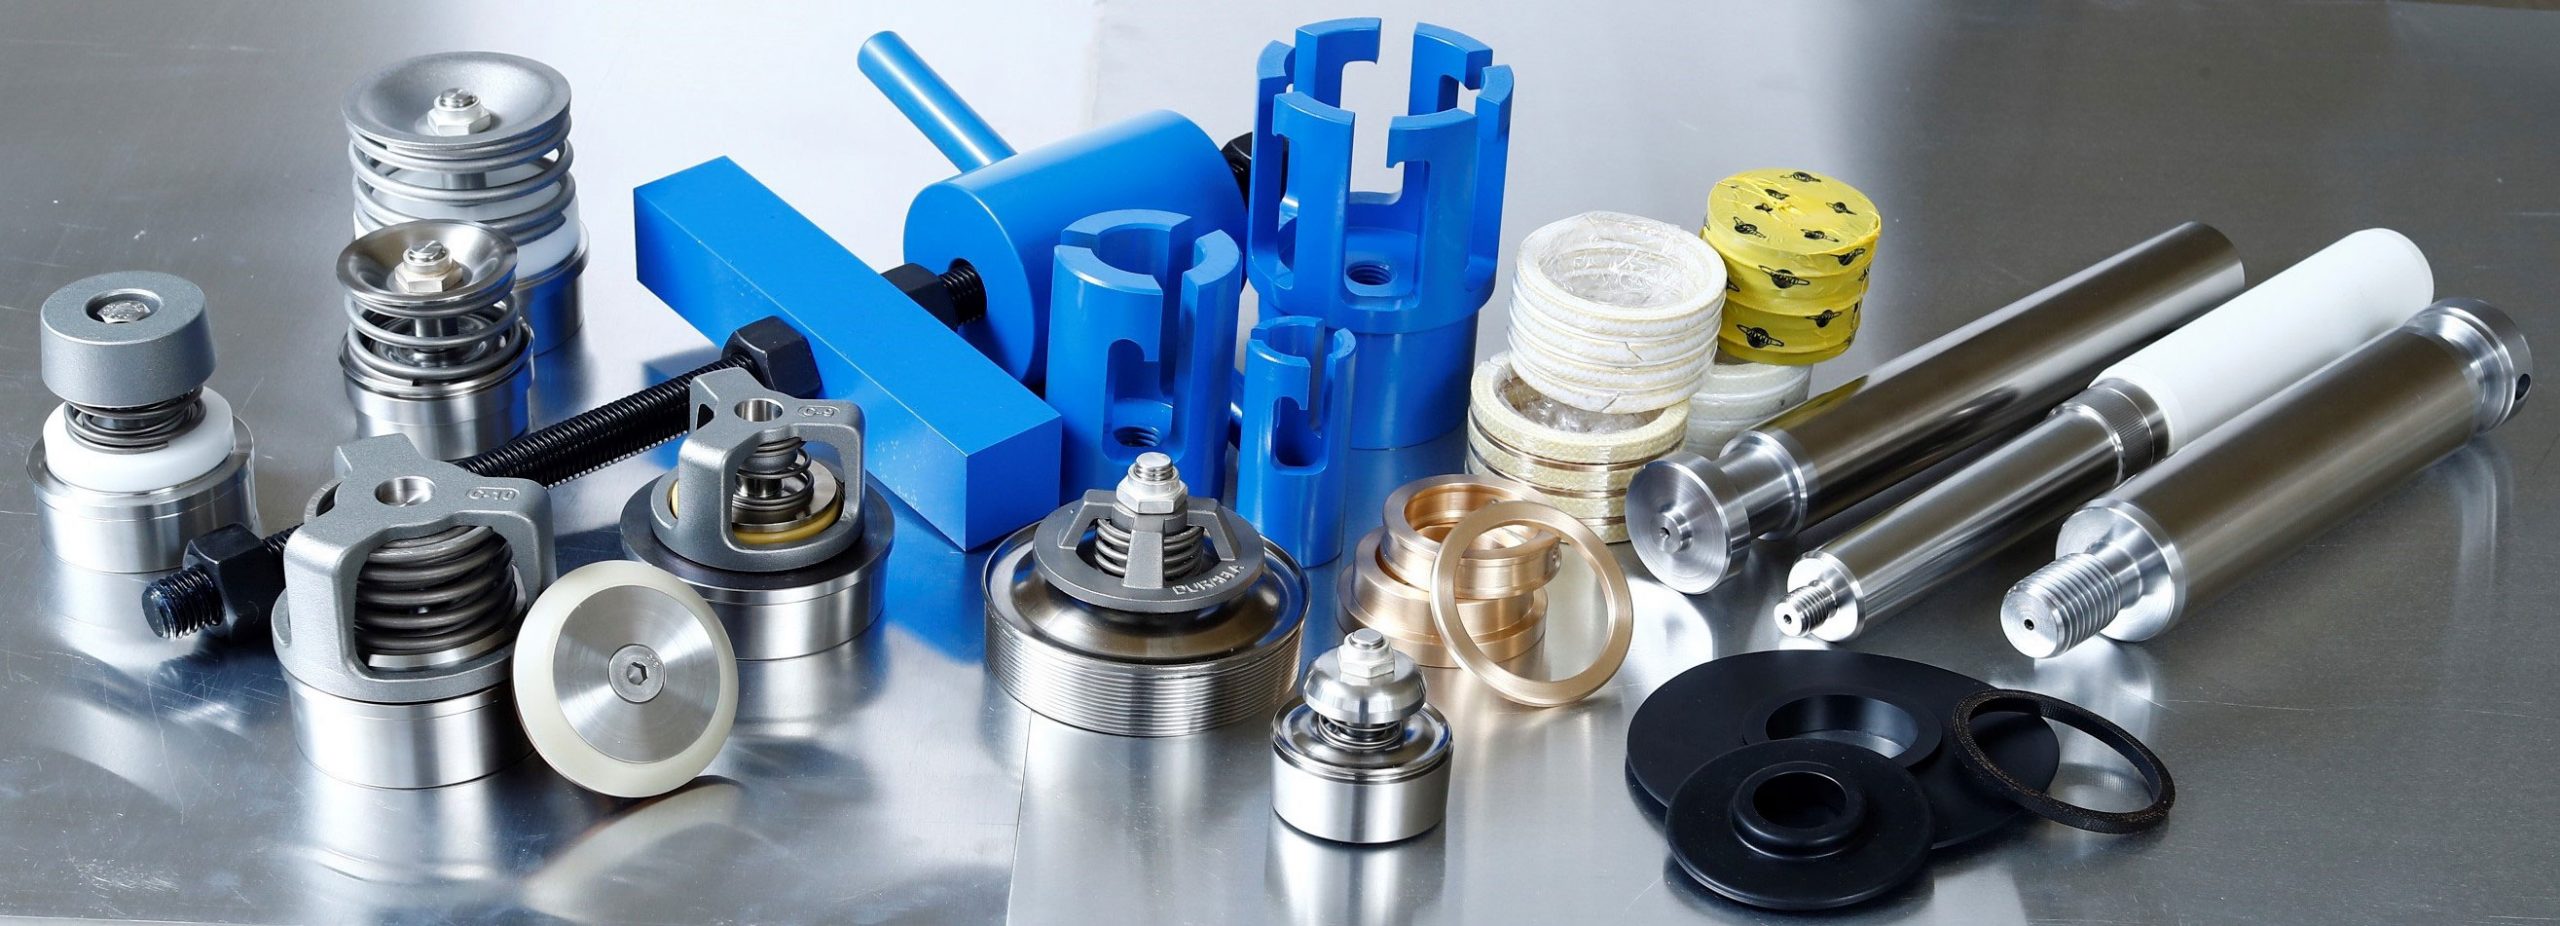 Triangle Pump Components Inc. products